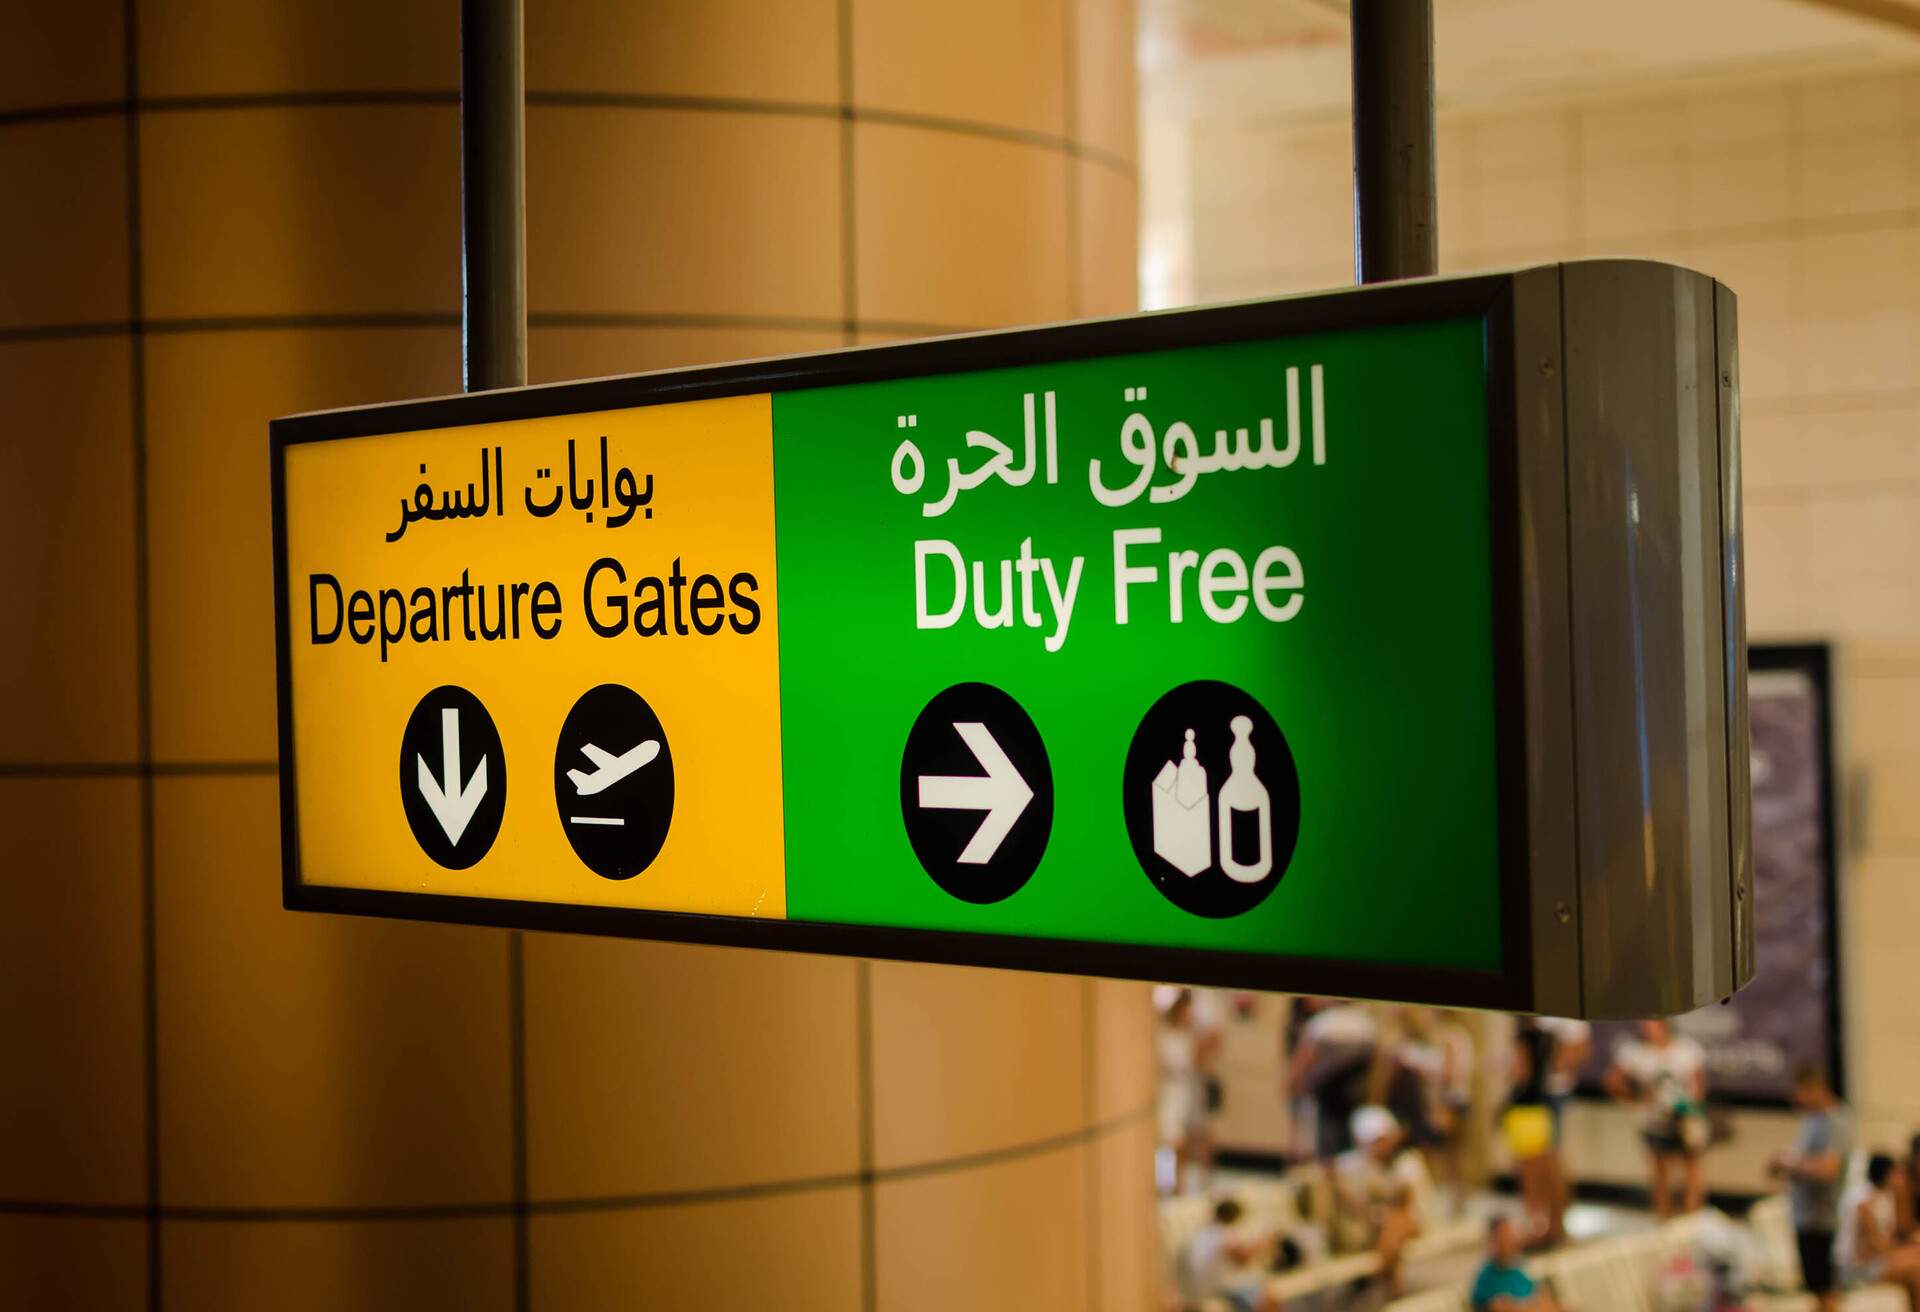 Departure gates and a Duty Free board with Arabic and English translations.